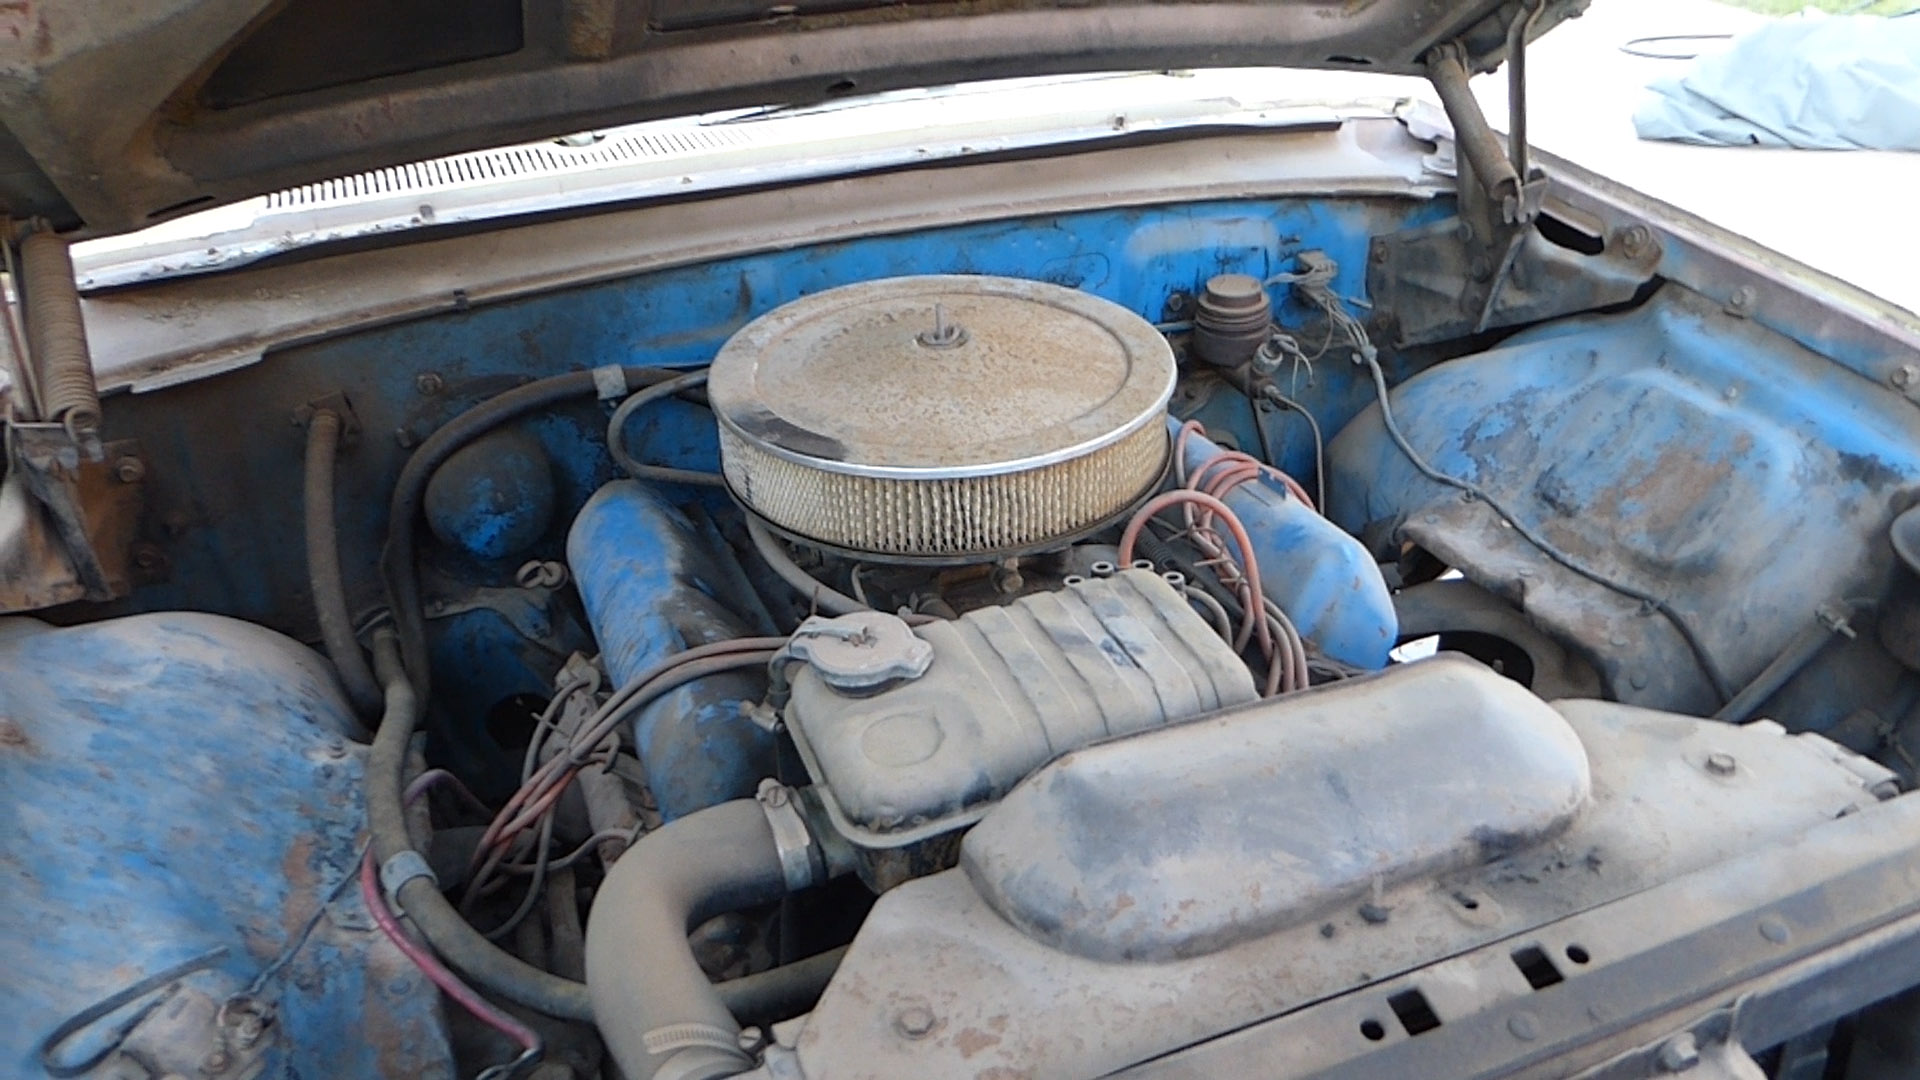 First look at the '63 Ford Galaxie fe 390 engine before restoration